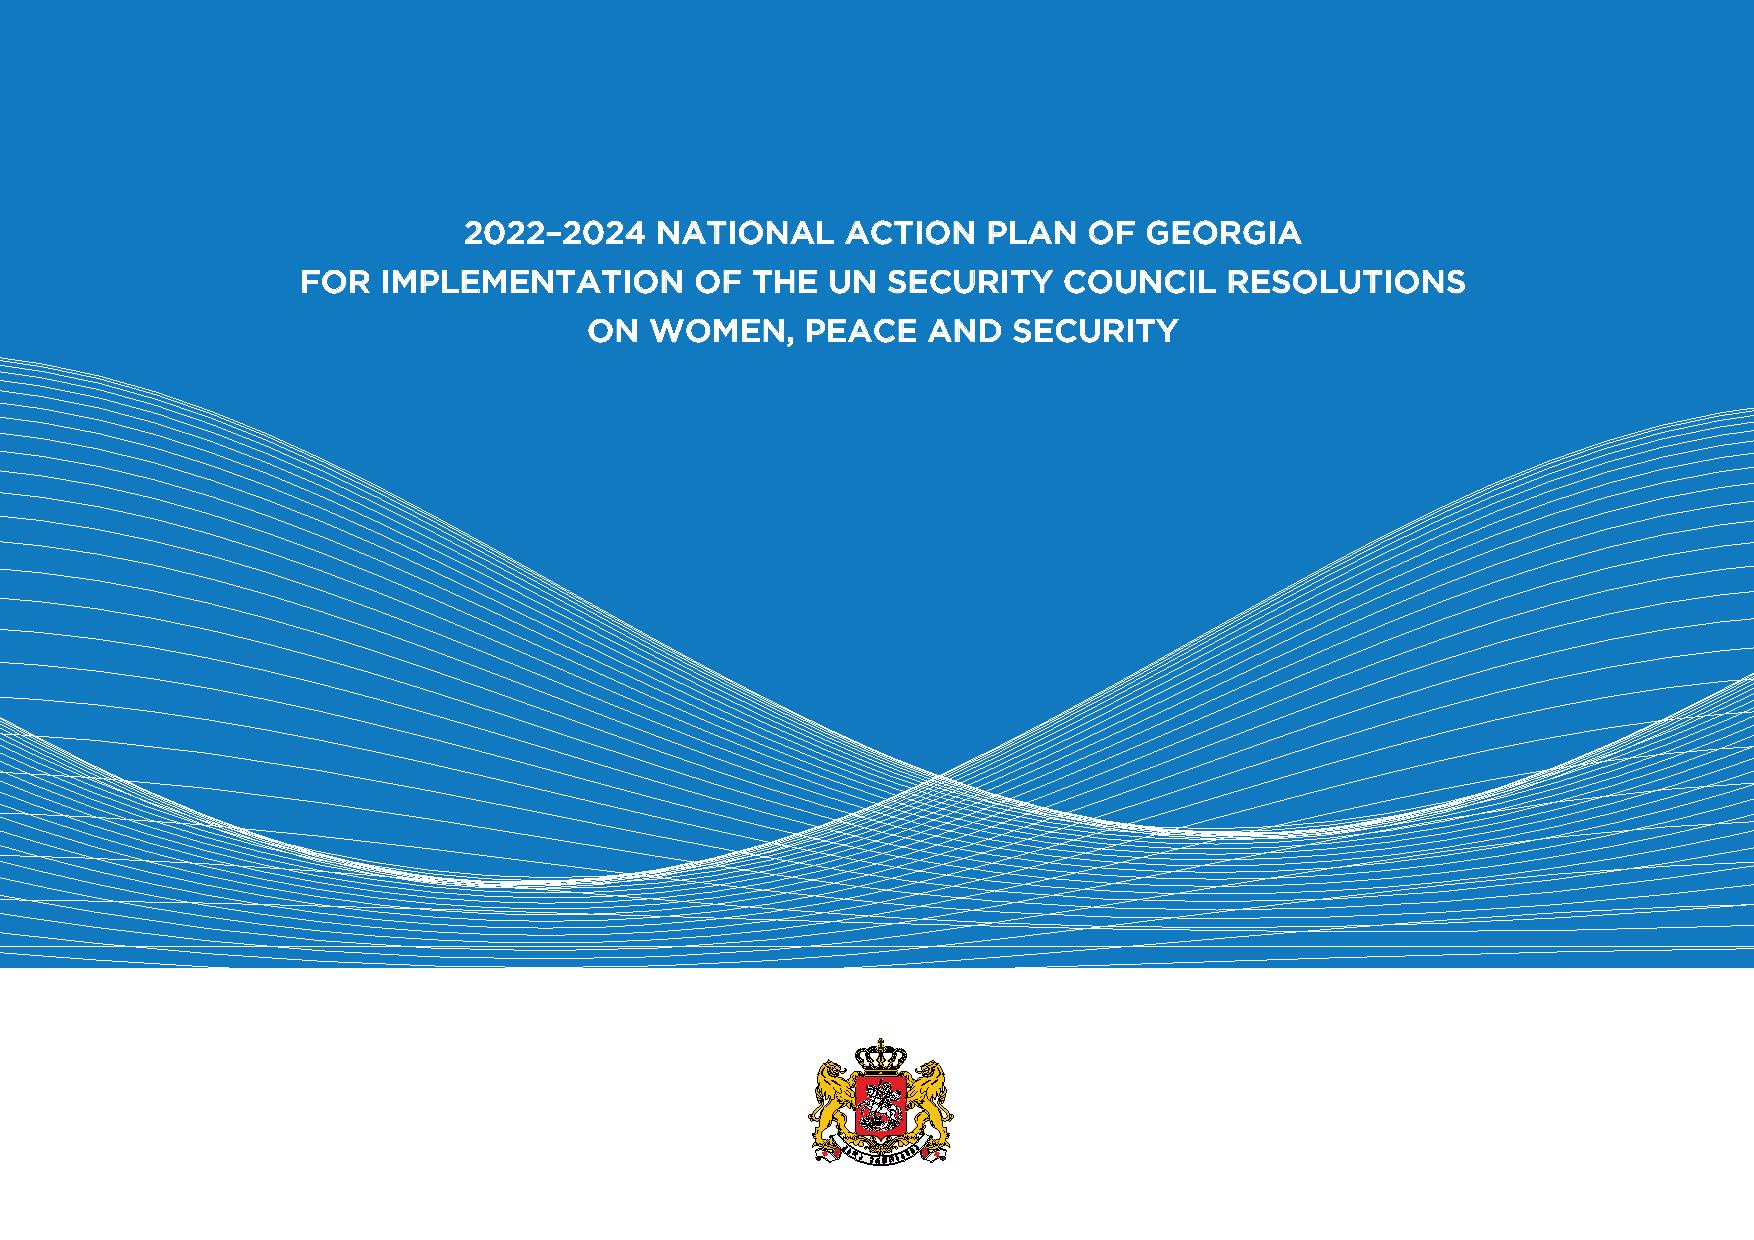 2022-2024 National Action Plan of Georgia for Implementation of the UN Security Council Resolutions on Women, Peace and Security - cover